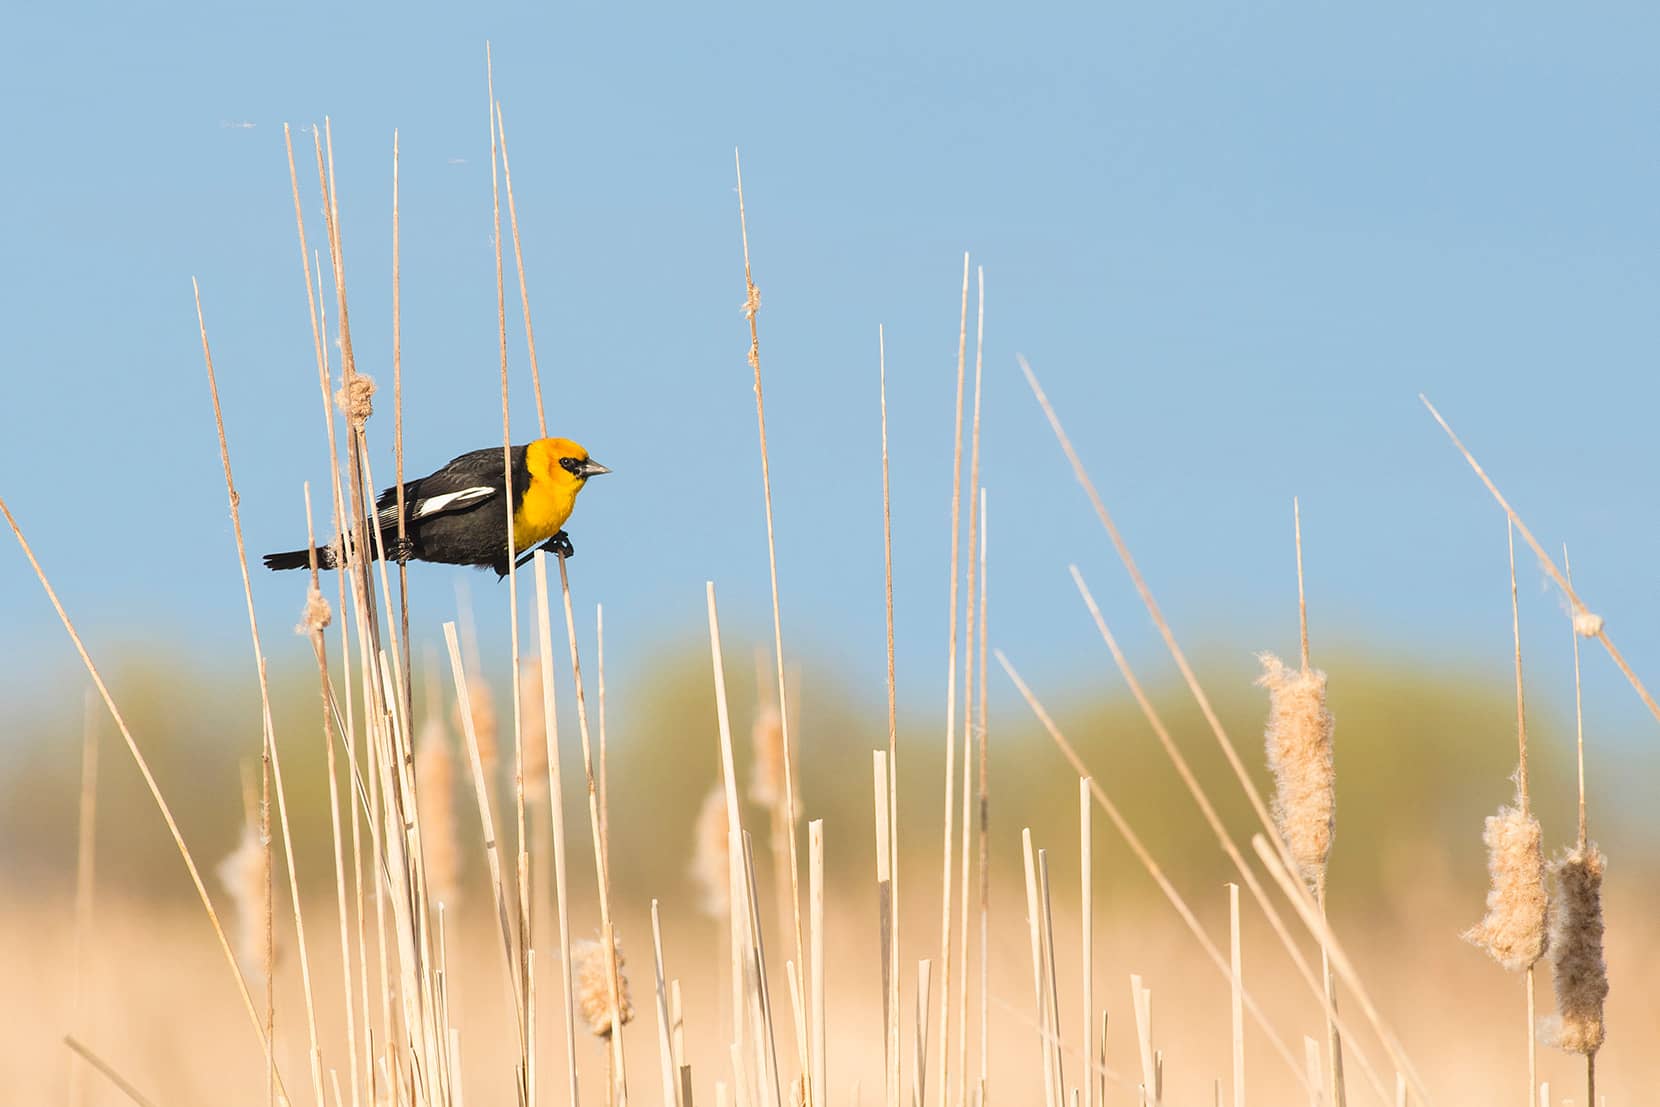 Yellow-headed blackbird perched on a cattail